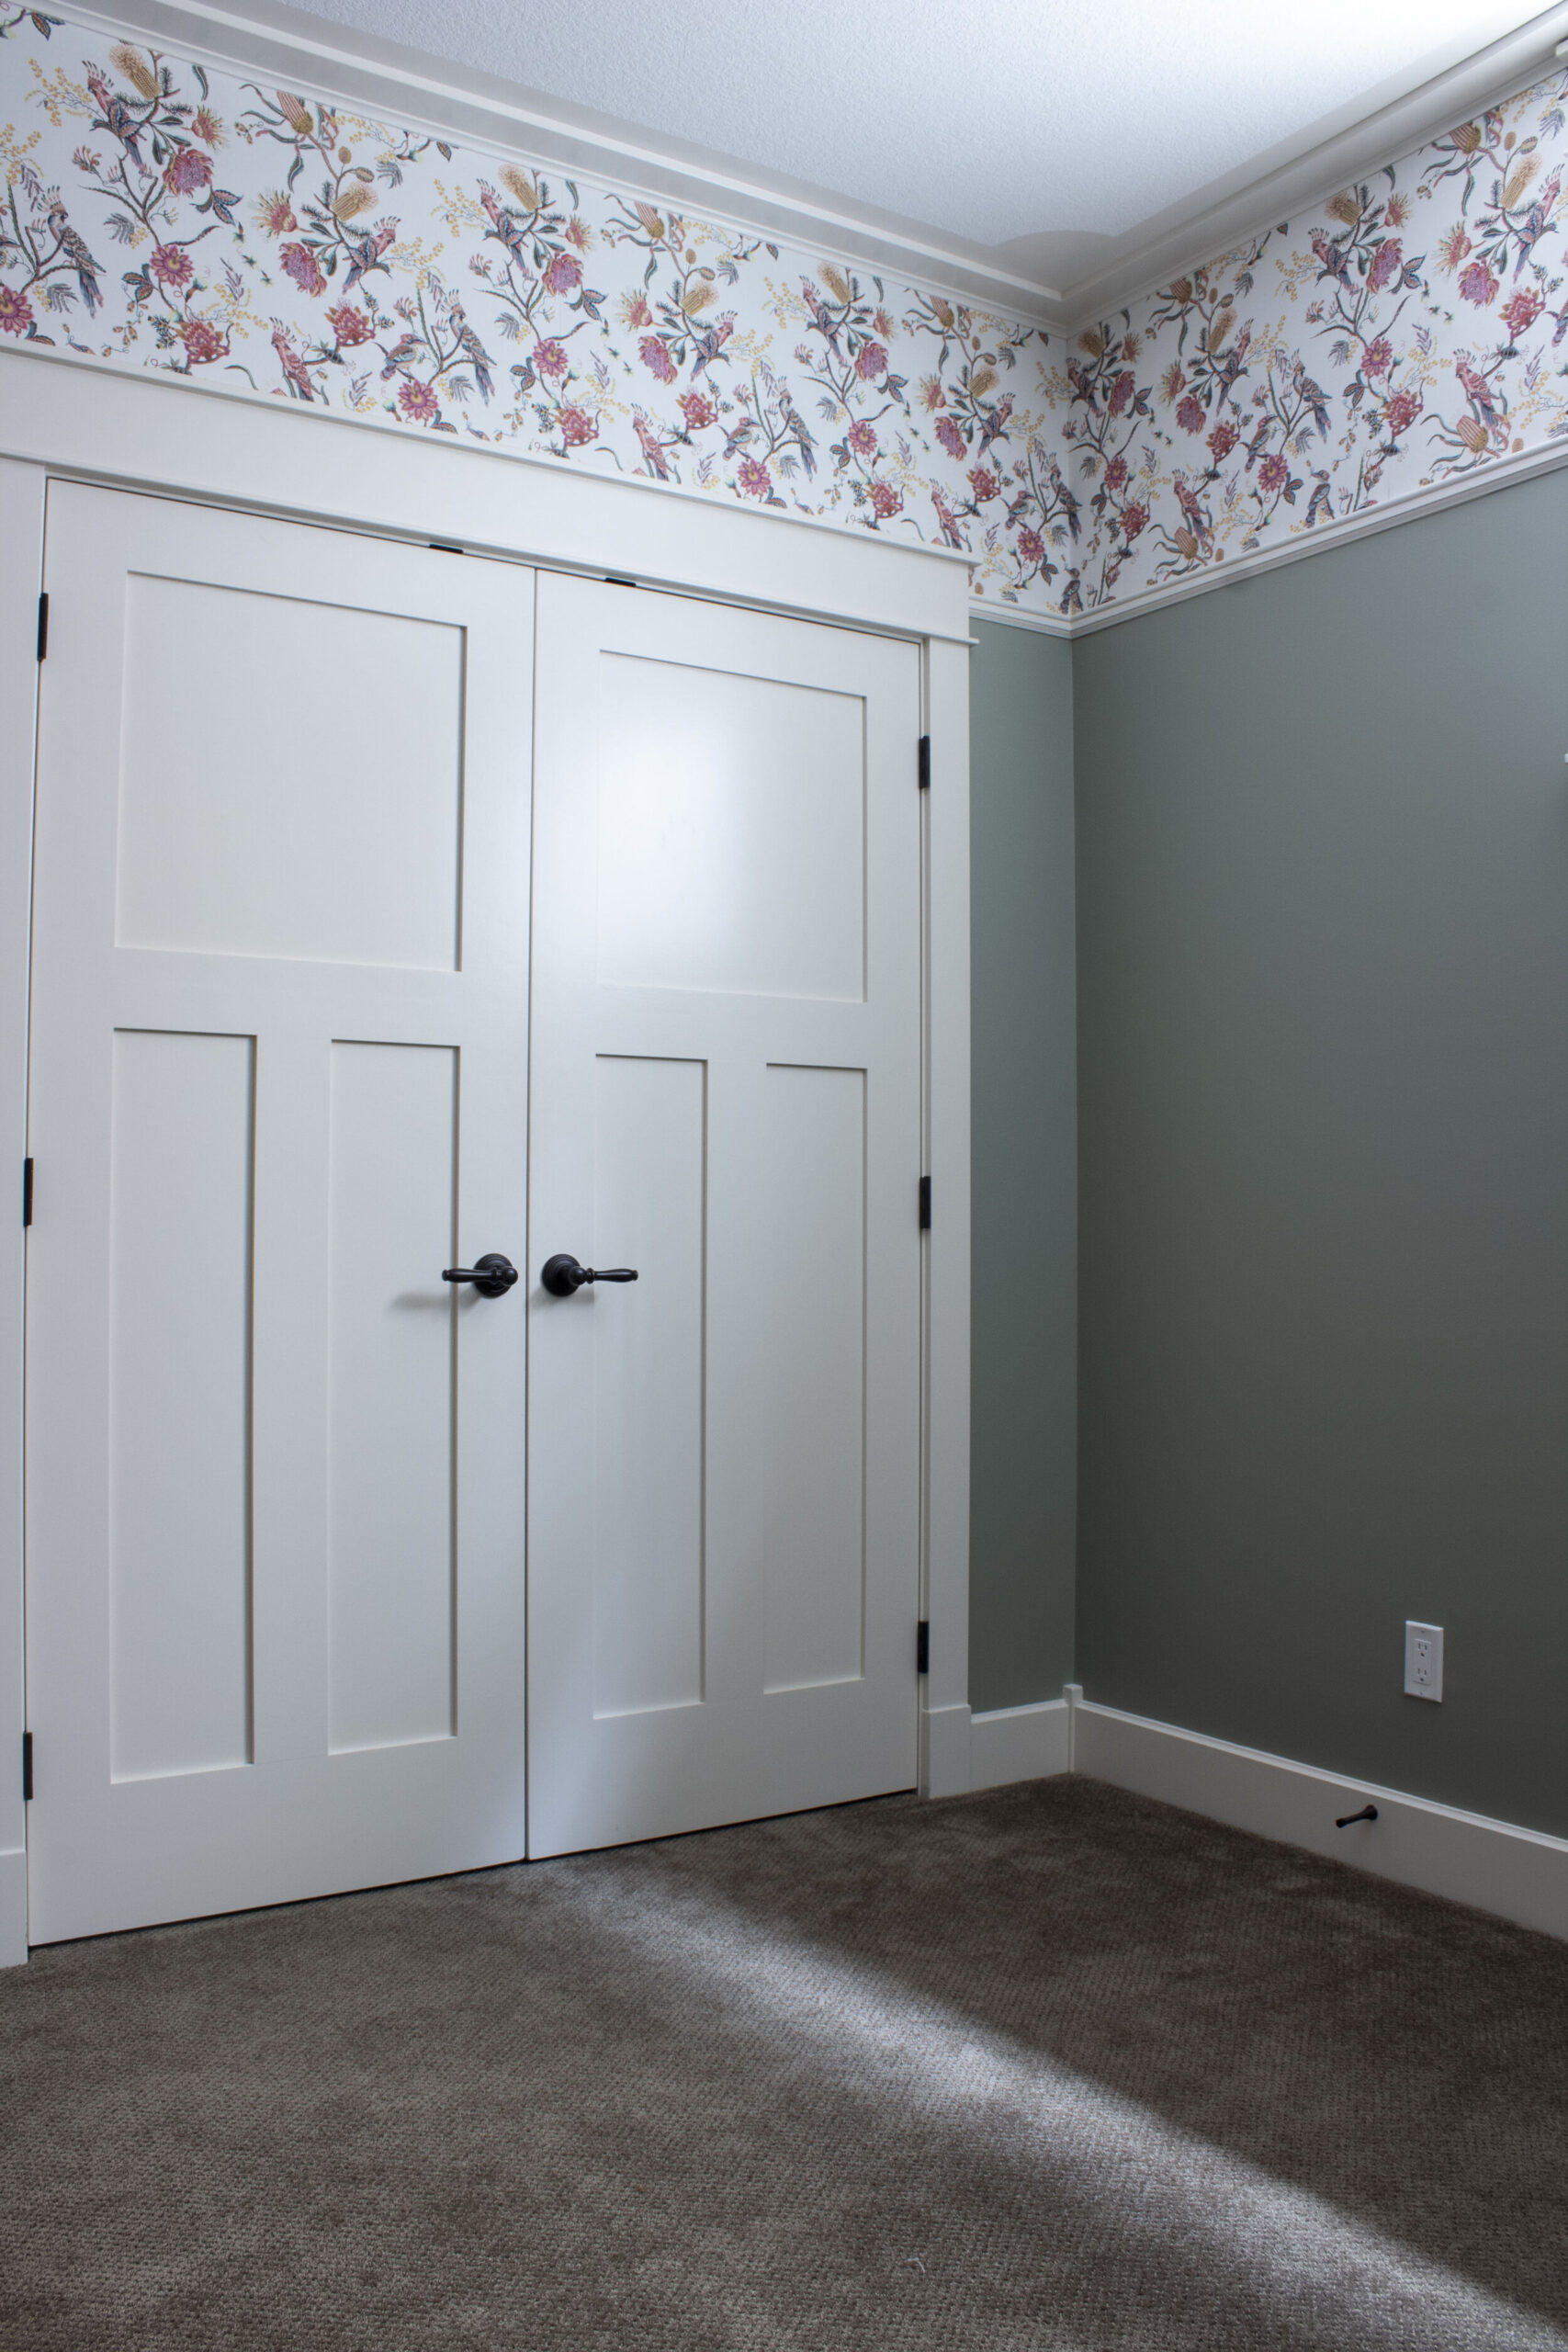 closet doors in white with white trim and wallpaper installed above a picture rail moulding, with green walls below